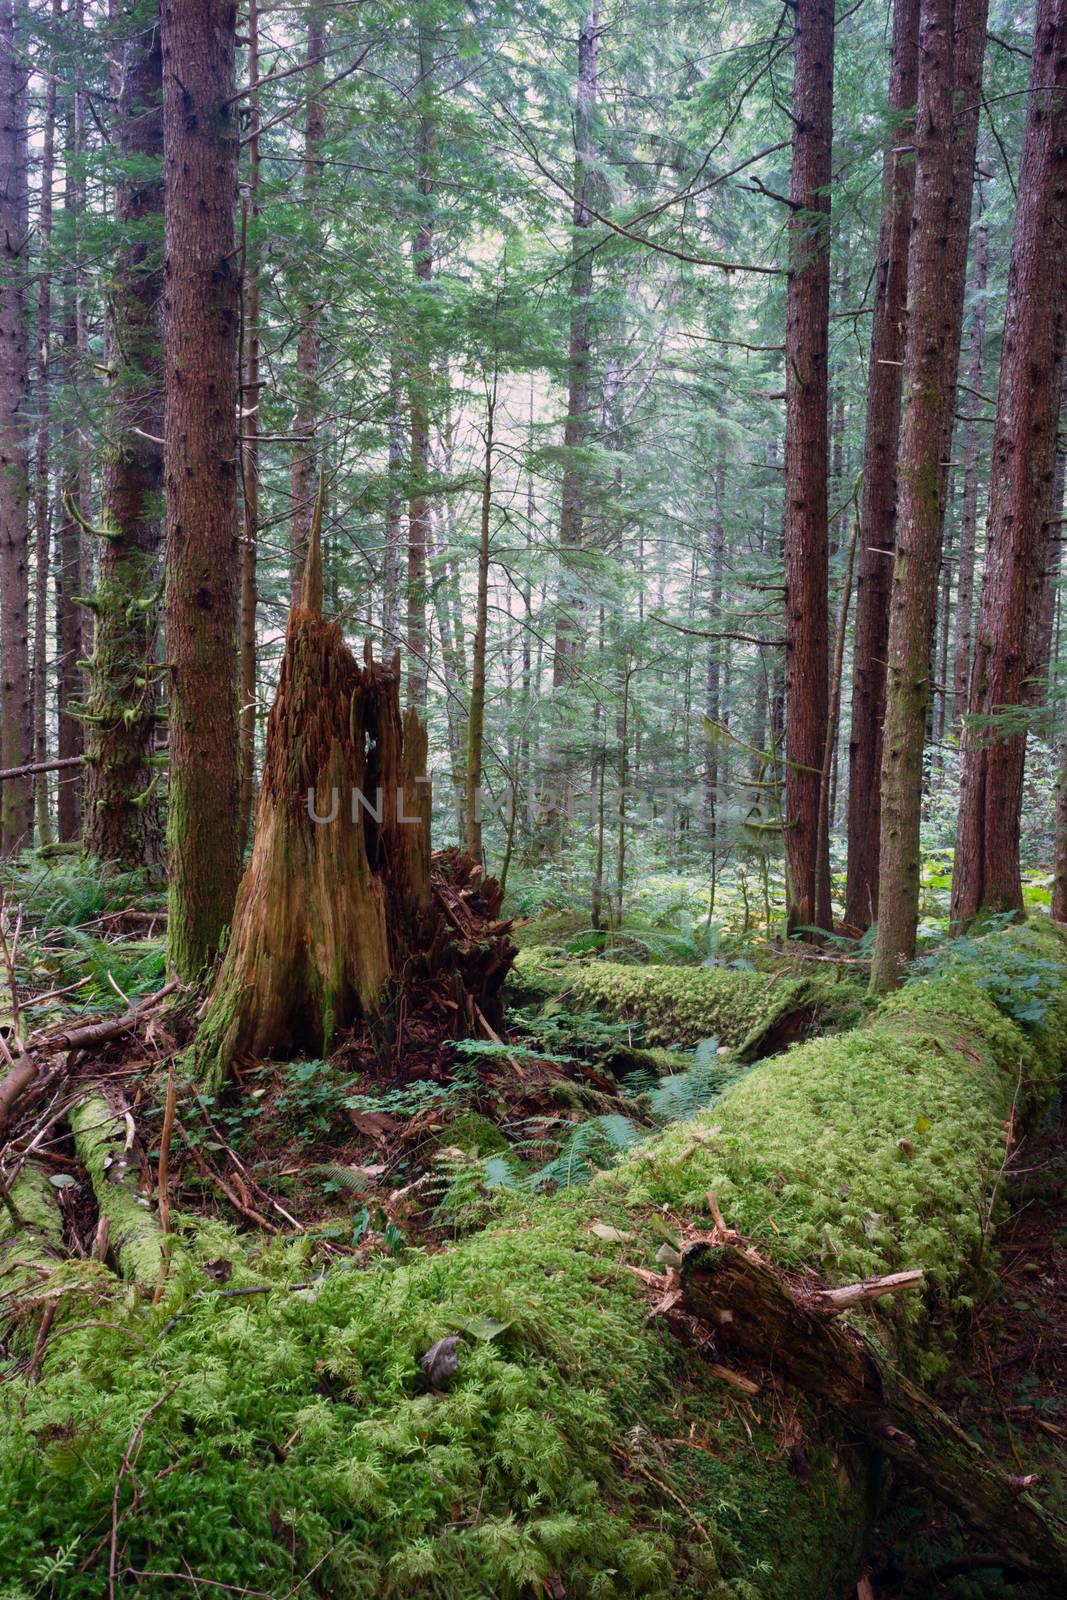 Rainforest Fallen Logs Rotted Stump Moss Covered Tree Trunk by ChrisBoswell